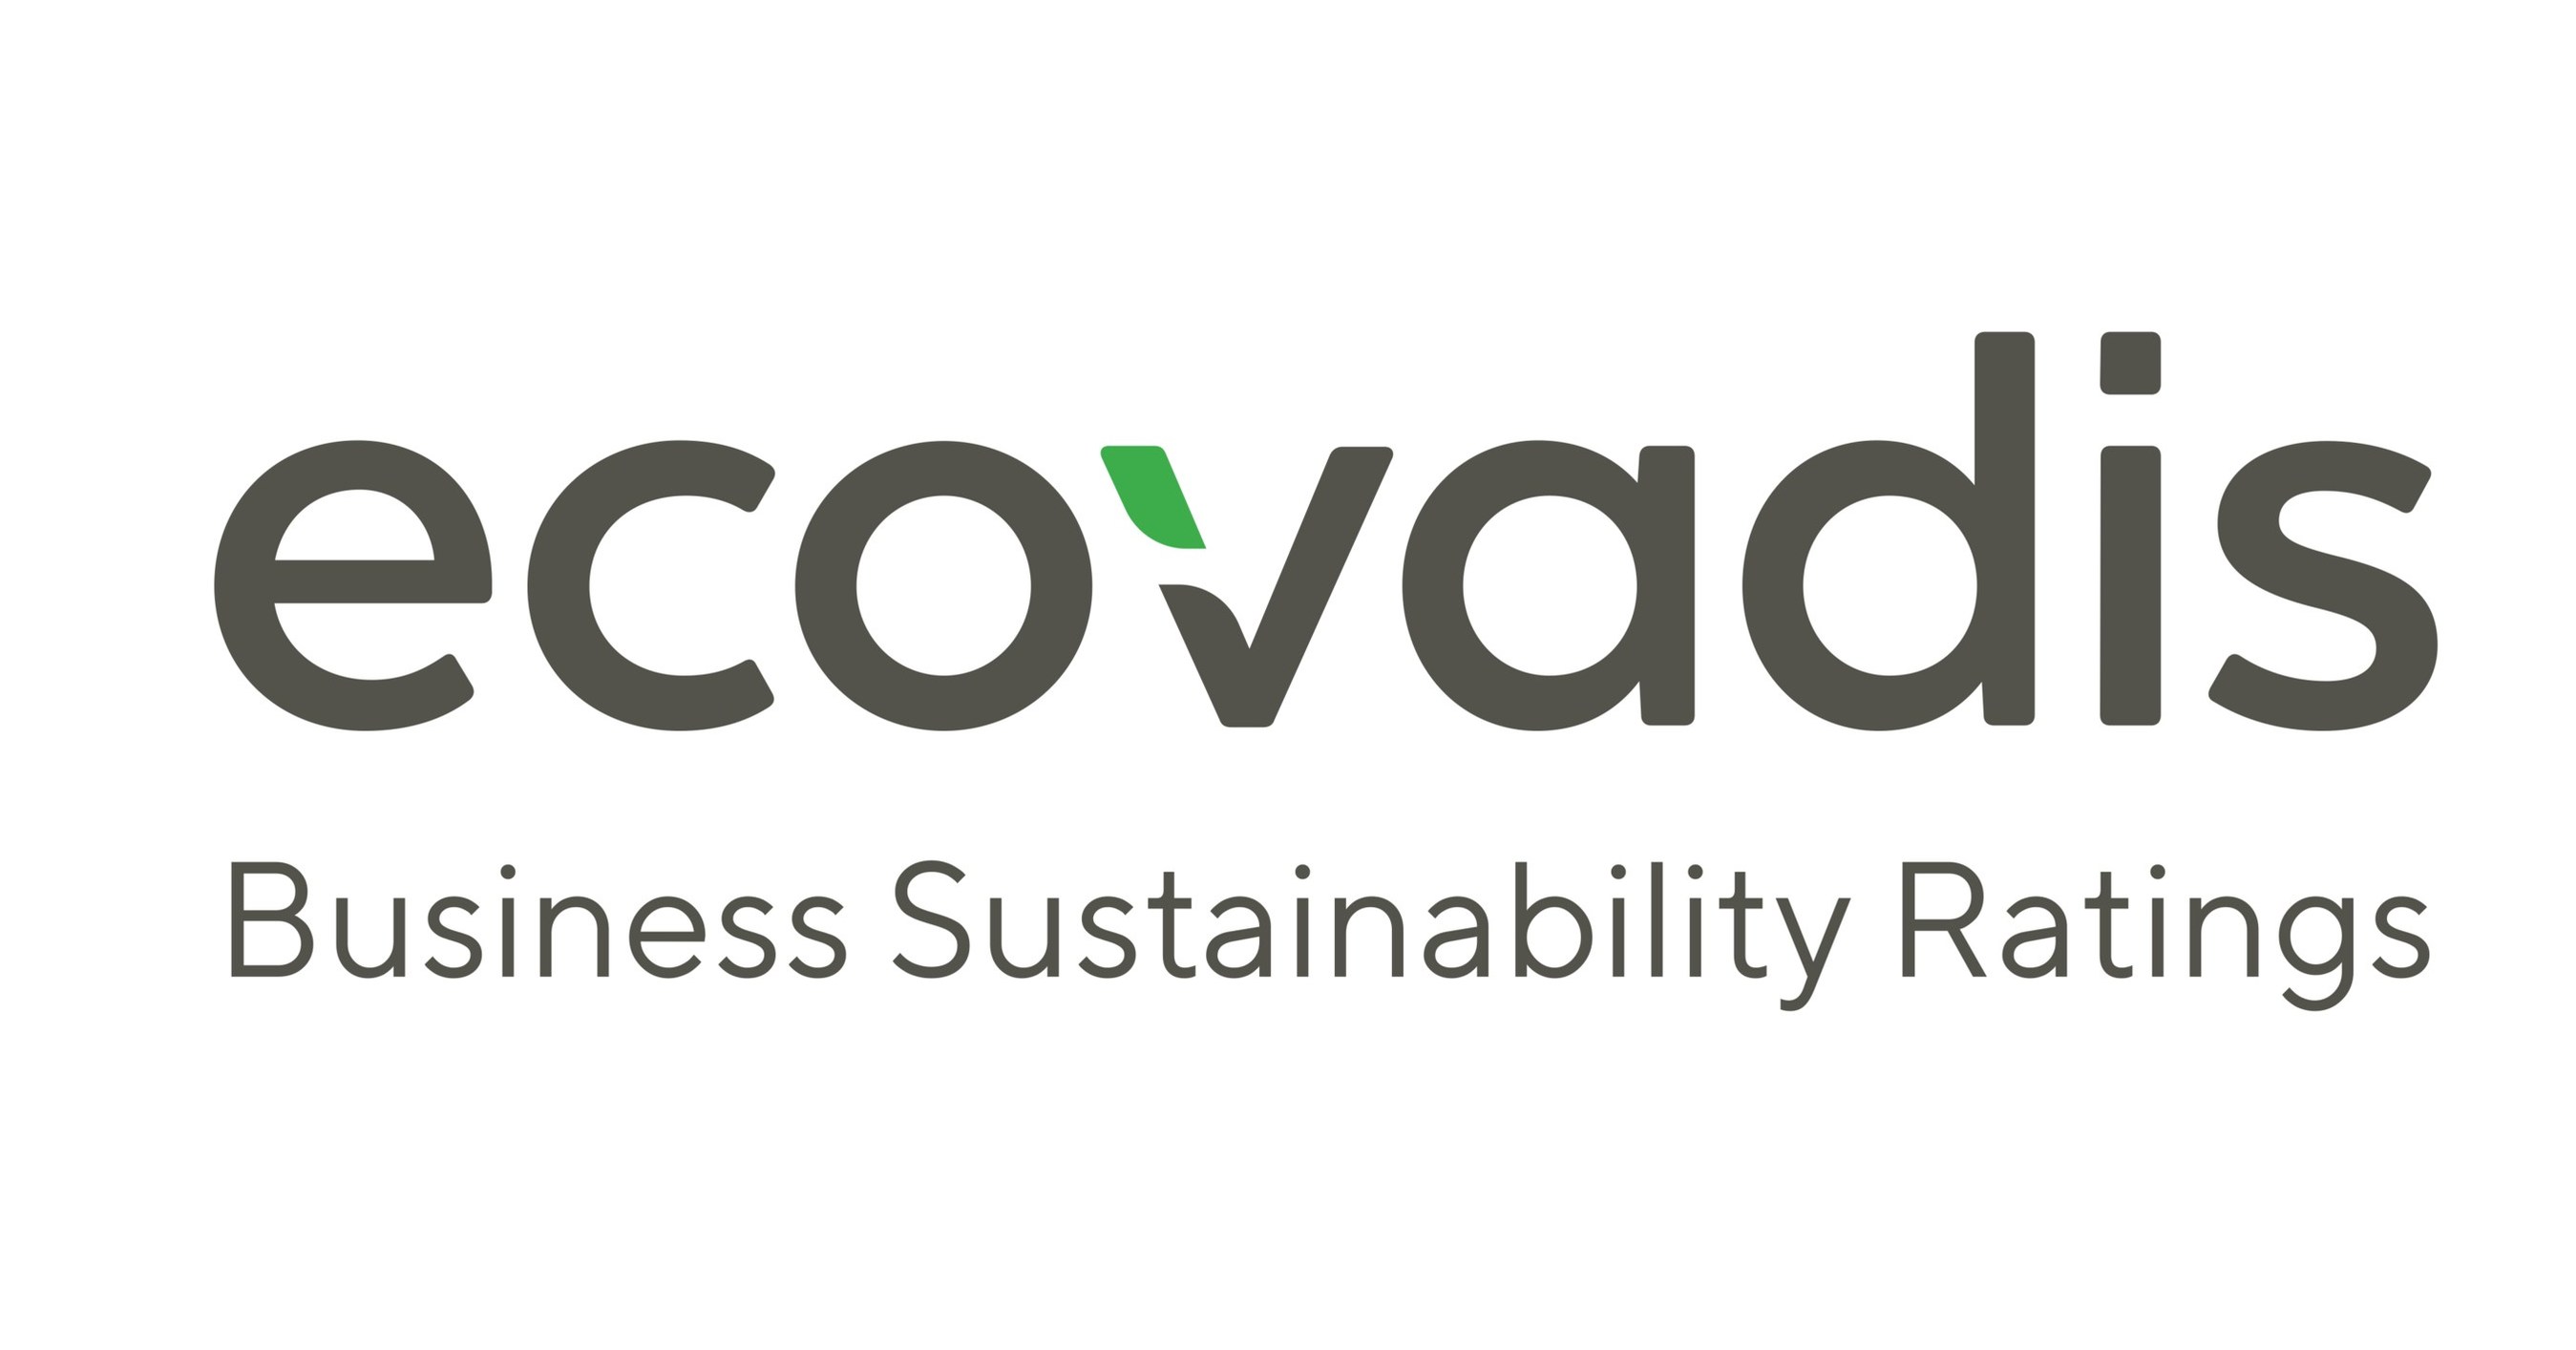 EcoVadis' New Carbon Action Module Will Tackle Climate Change and Drive Significant, Long-term Emissions Reductions - PRNewswire